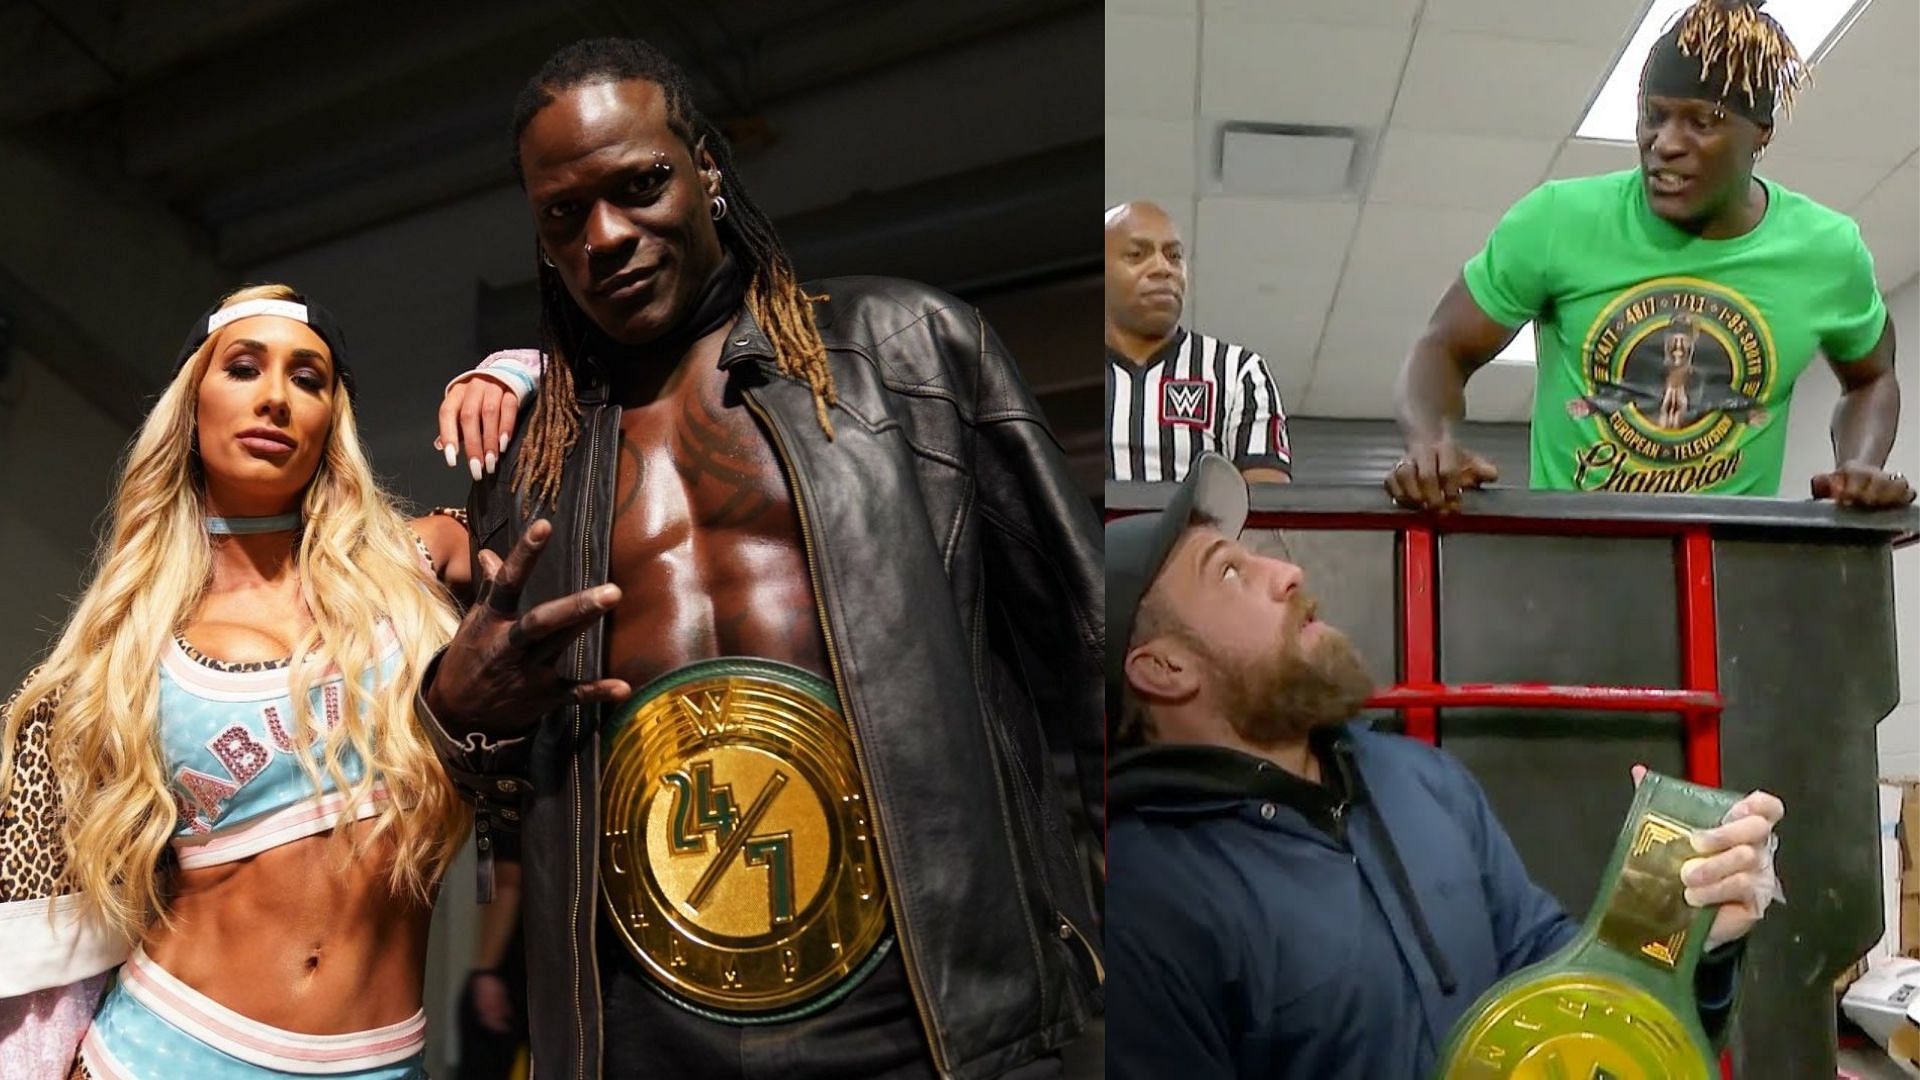 R-Truth has won the 24/7 Champion on numerous occasions